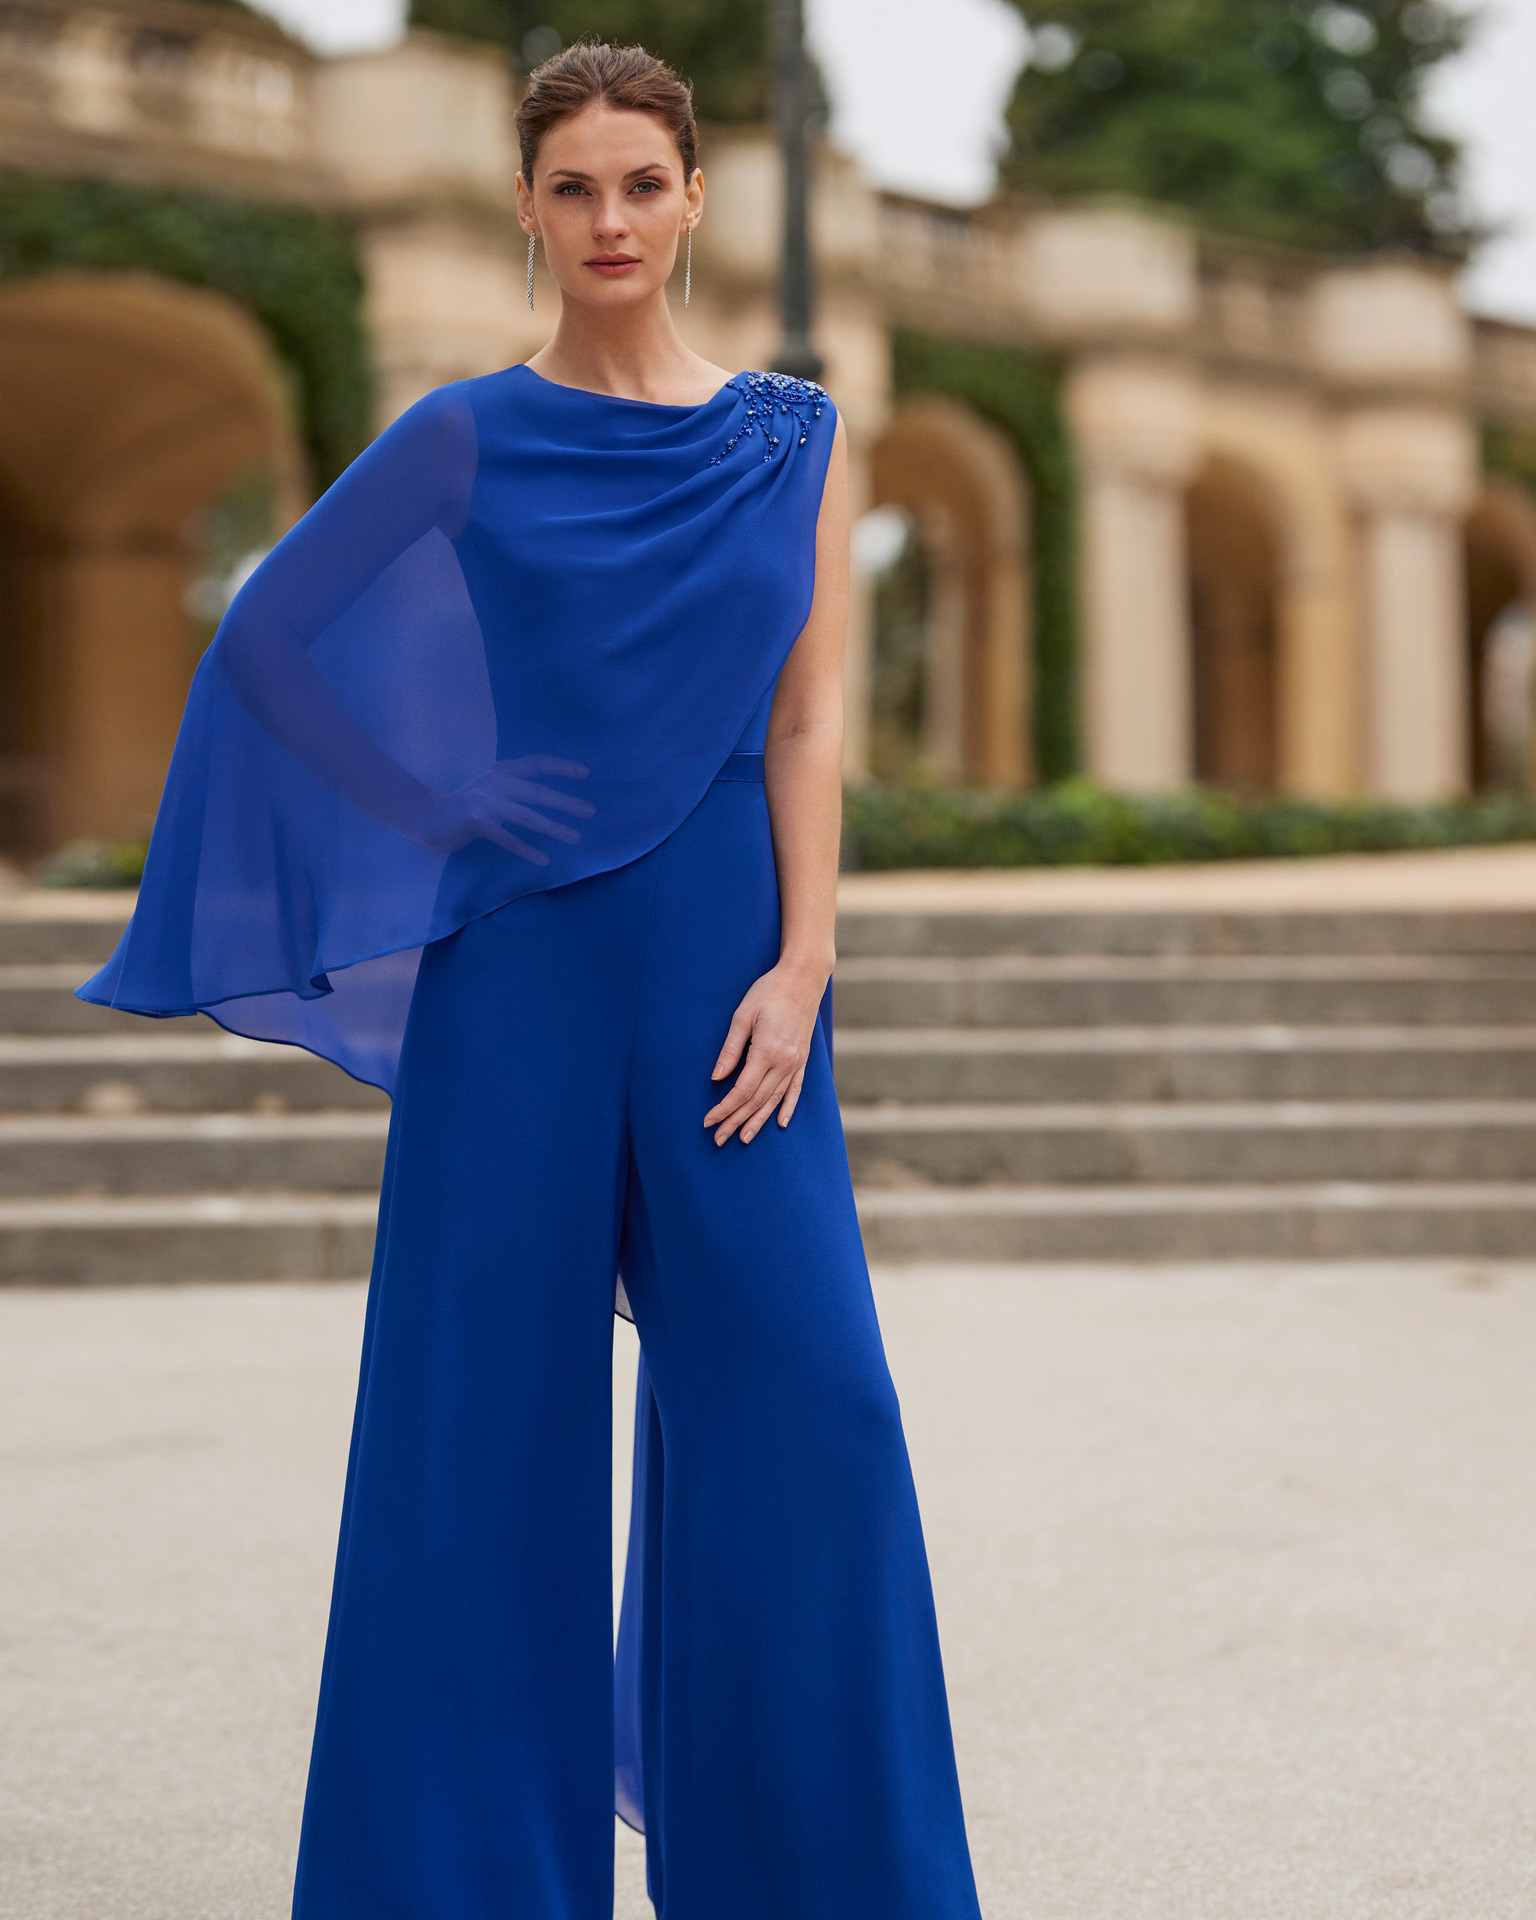 Simple cocktail pantsuit. Made with triacetate and beadwork. With bateau neckline and georgette cape. Couture Club look. MARFIL_BARCELONA.